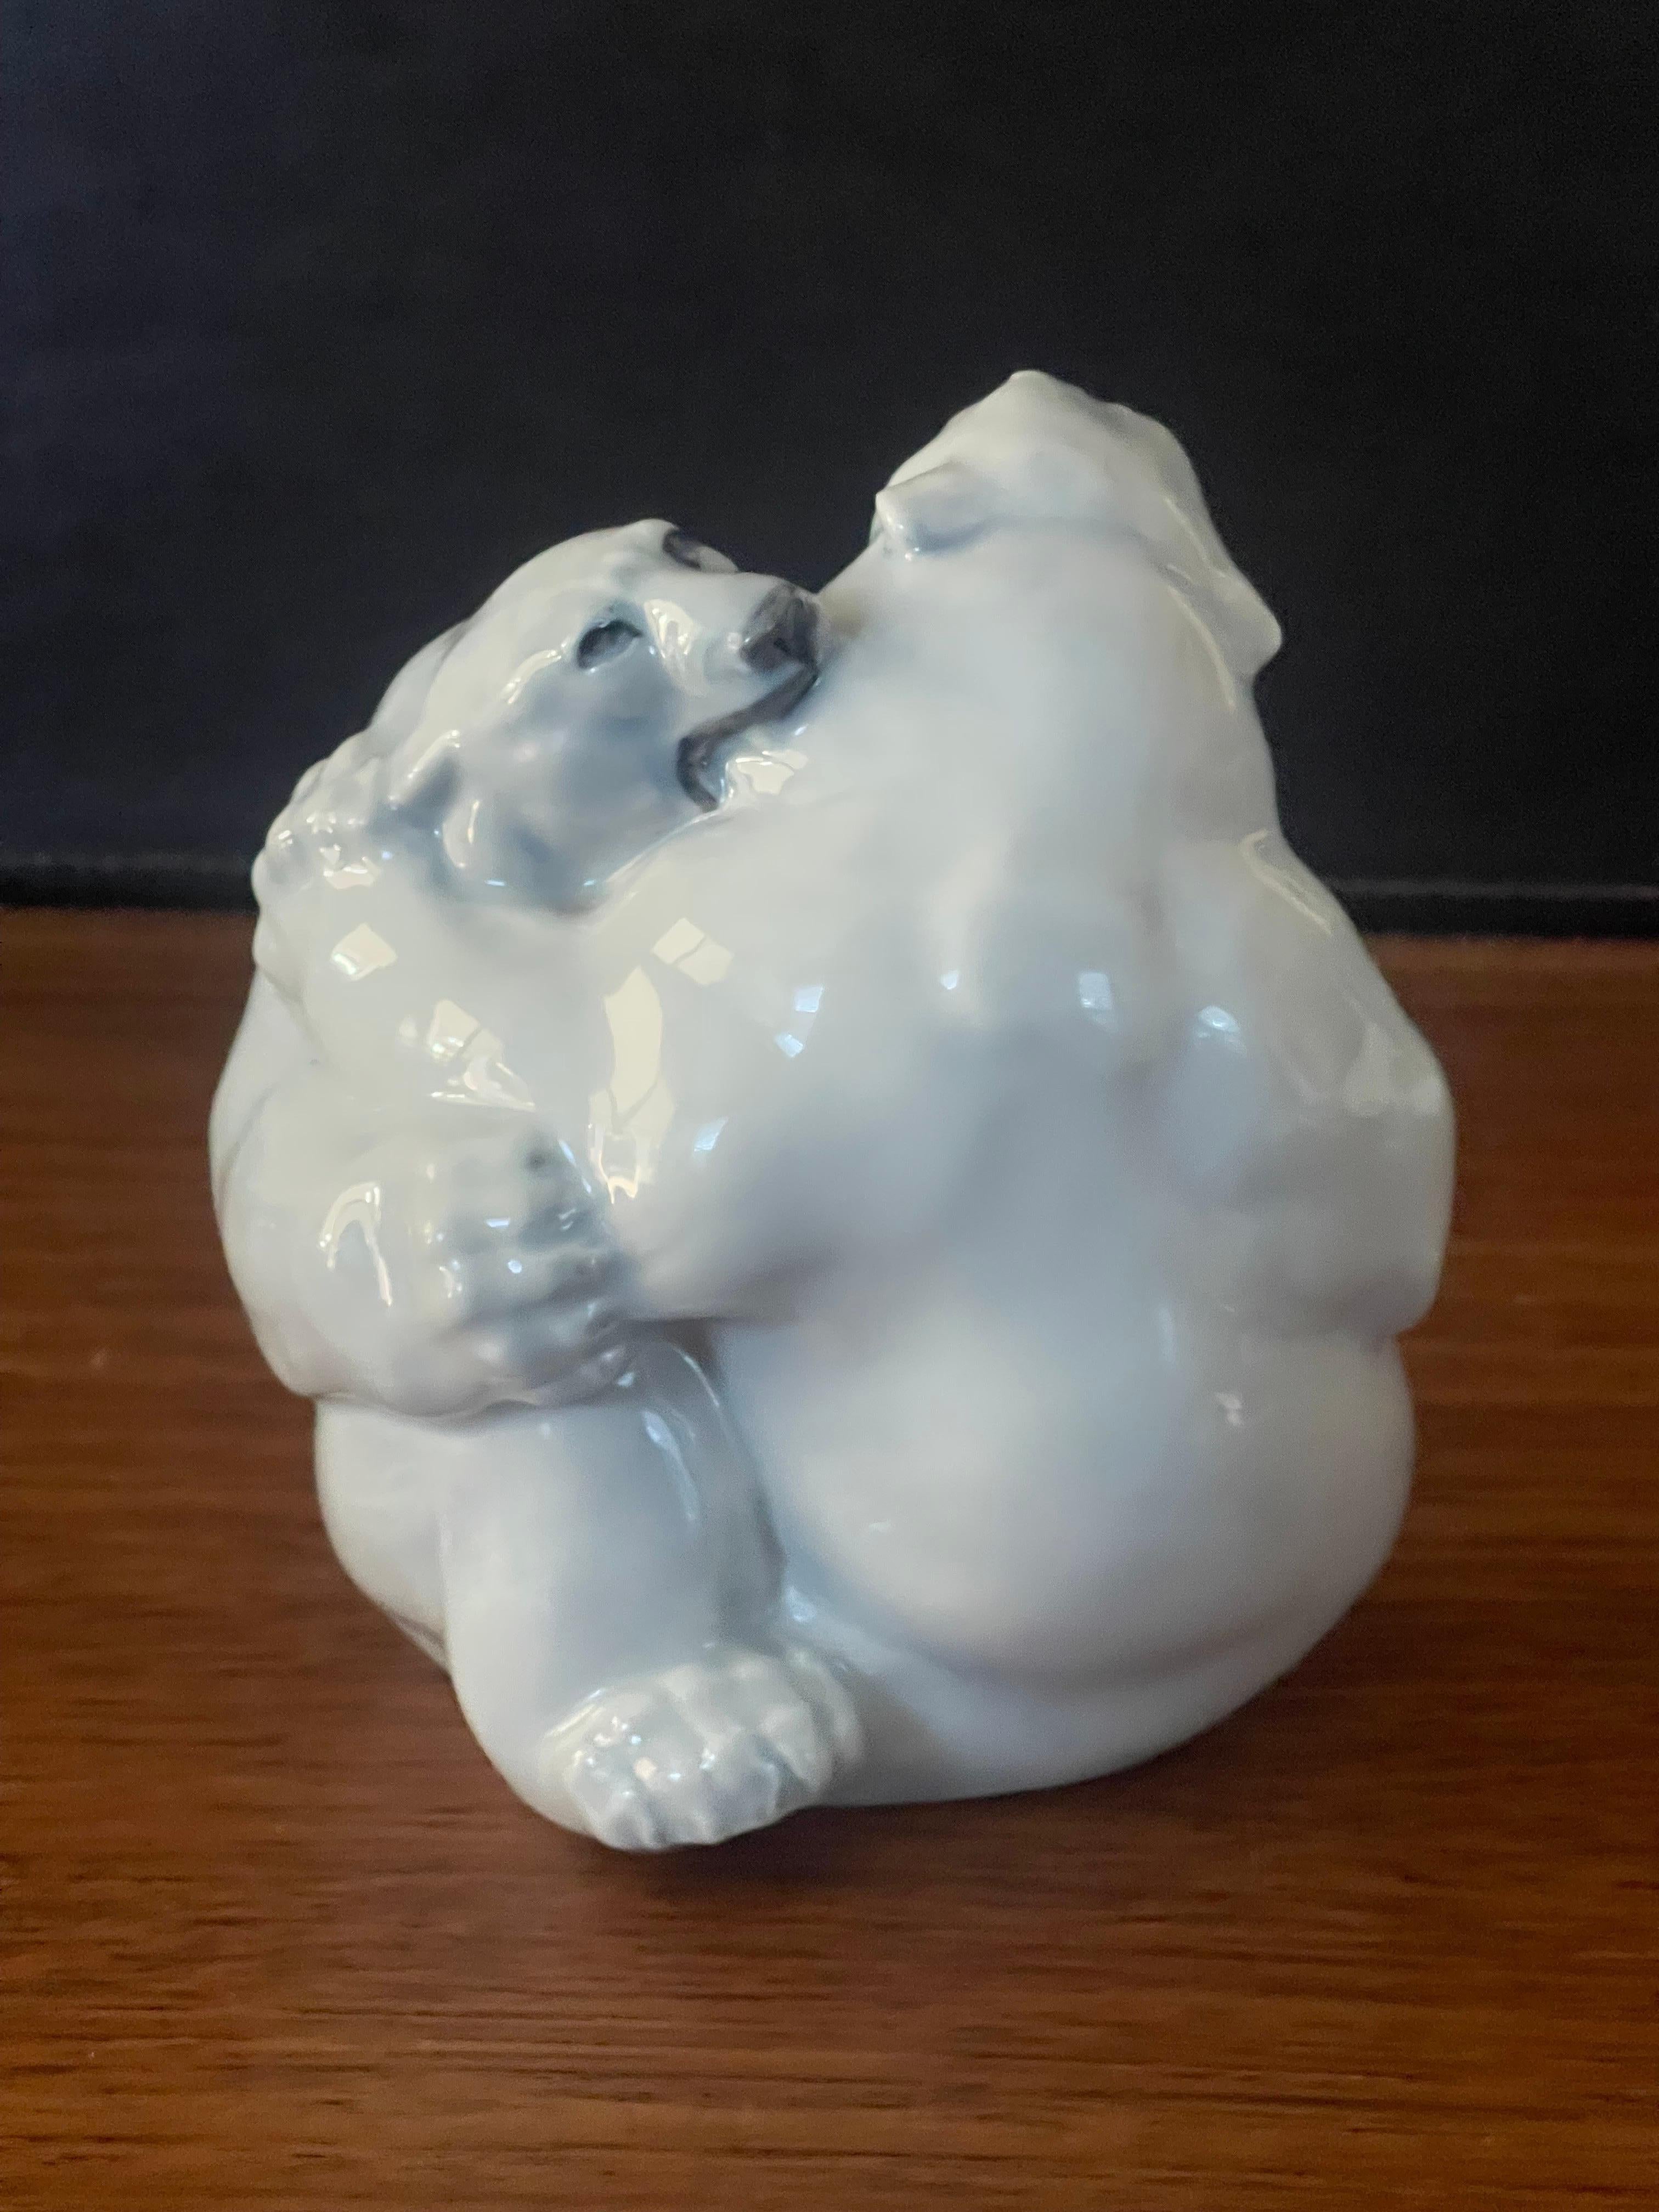 Porcelain Fighting Polar Bears Sculpture by Royal Copenhagen In Good Condition For Sale In San Diego, CA